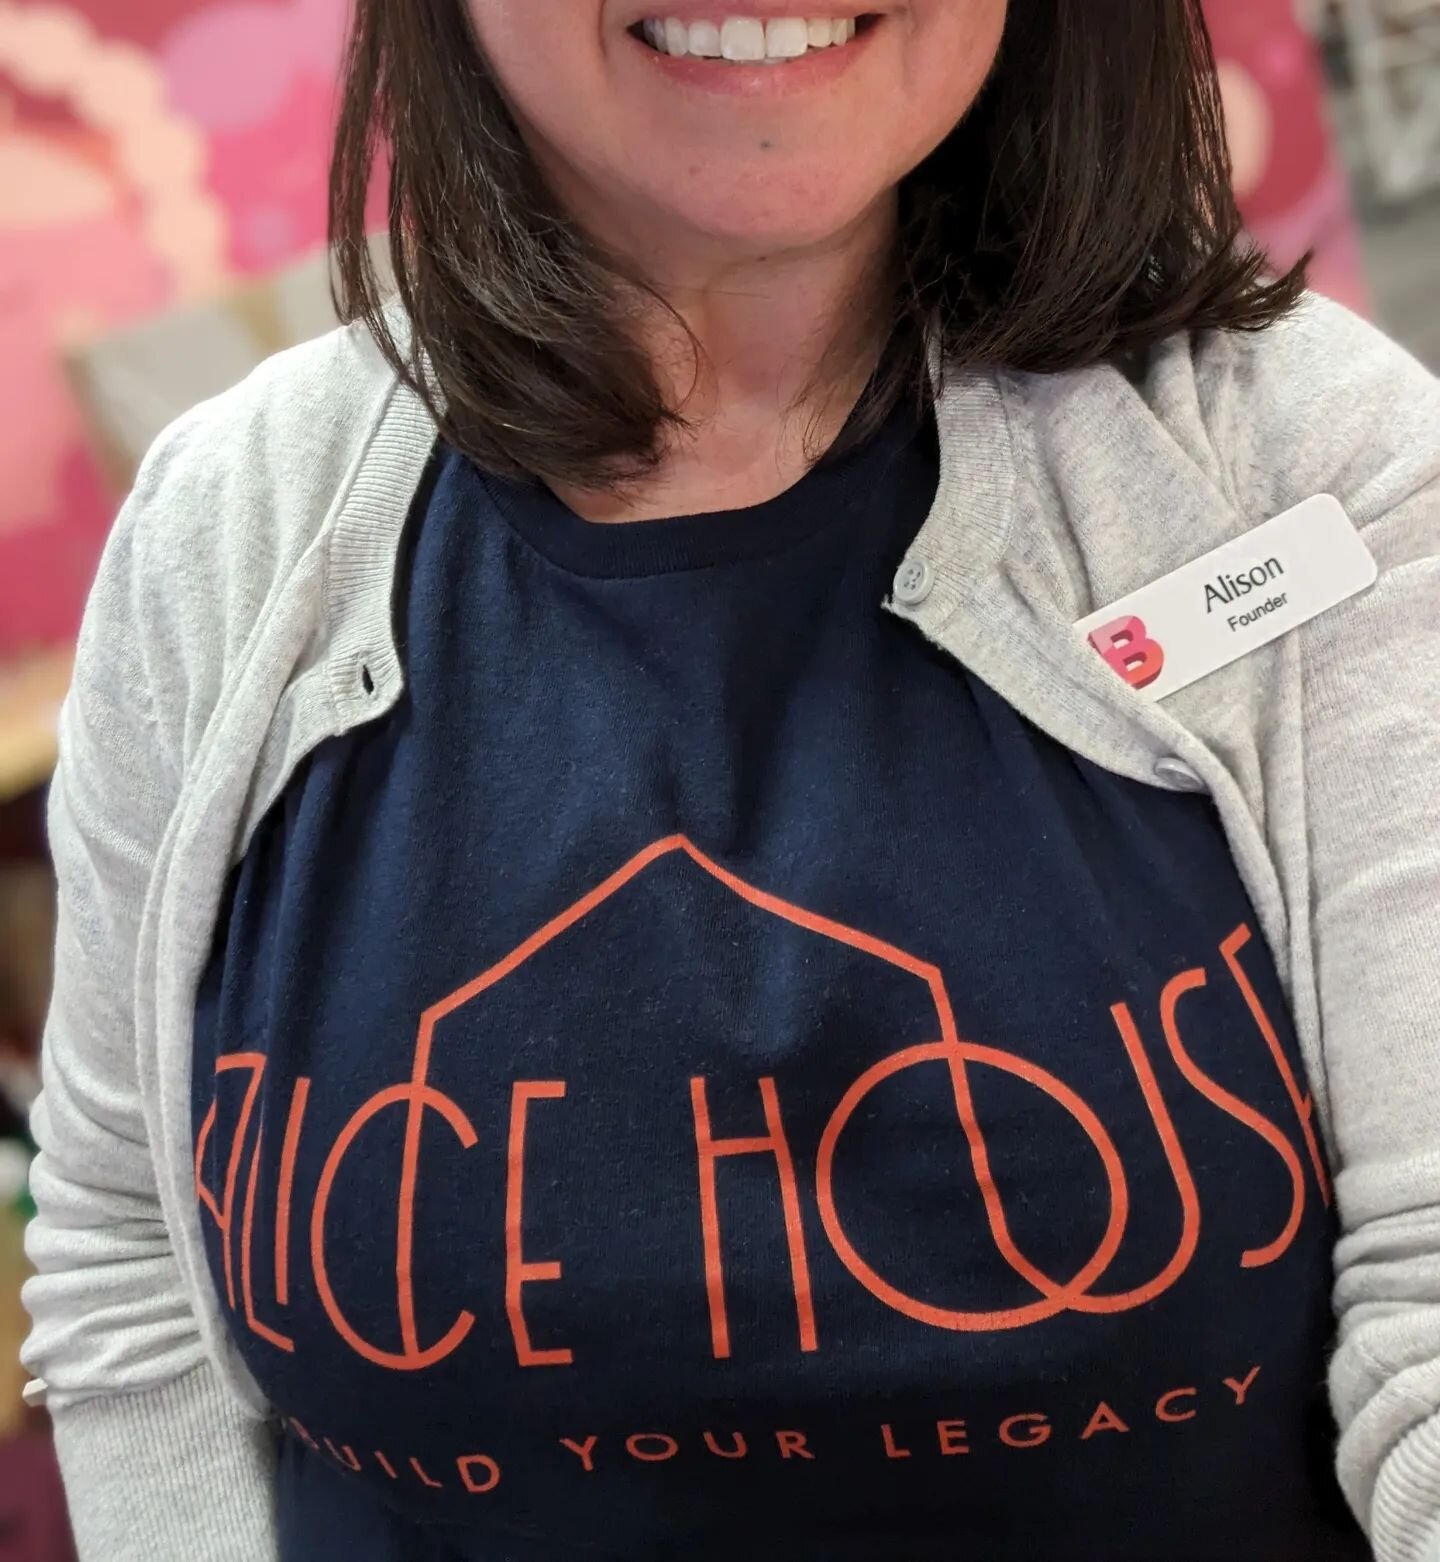 Supporting @alicehousetwtx today! I had the honor of speaking to the women of Alice House a while back and of course I am following along as they establish their vision of a space for women and working mothers with childcare. 💗